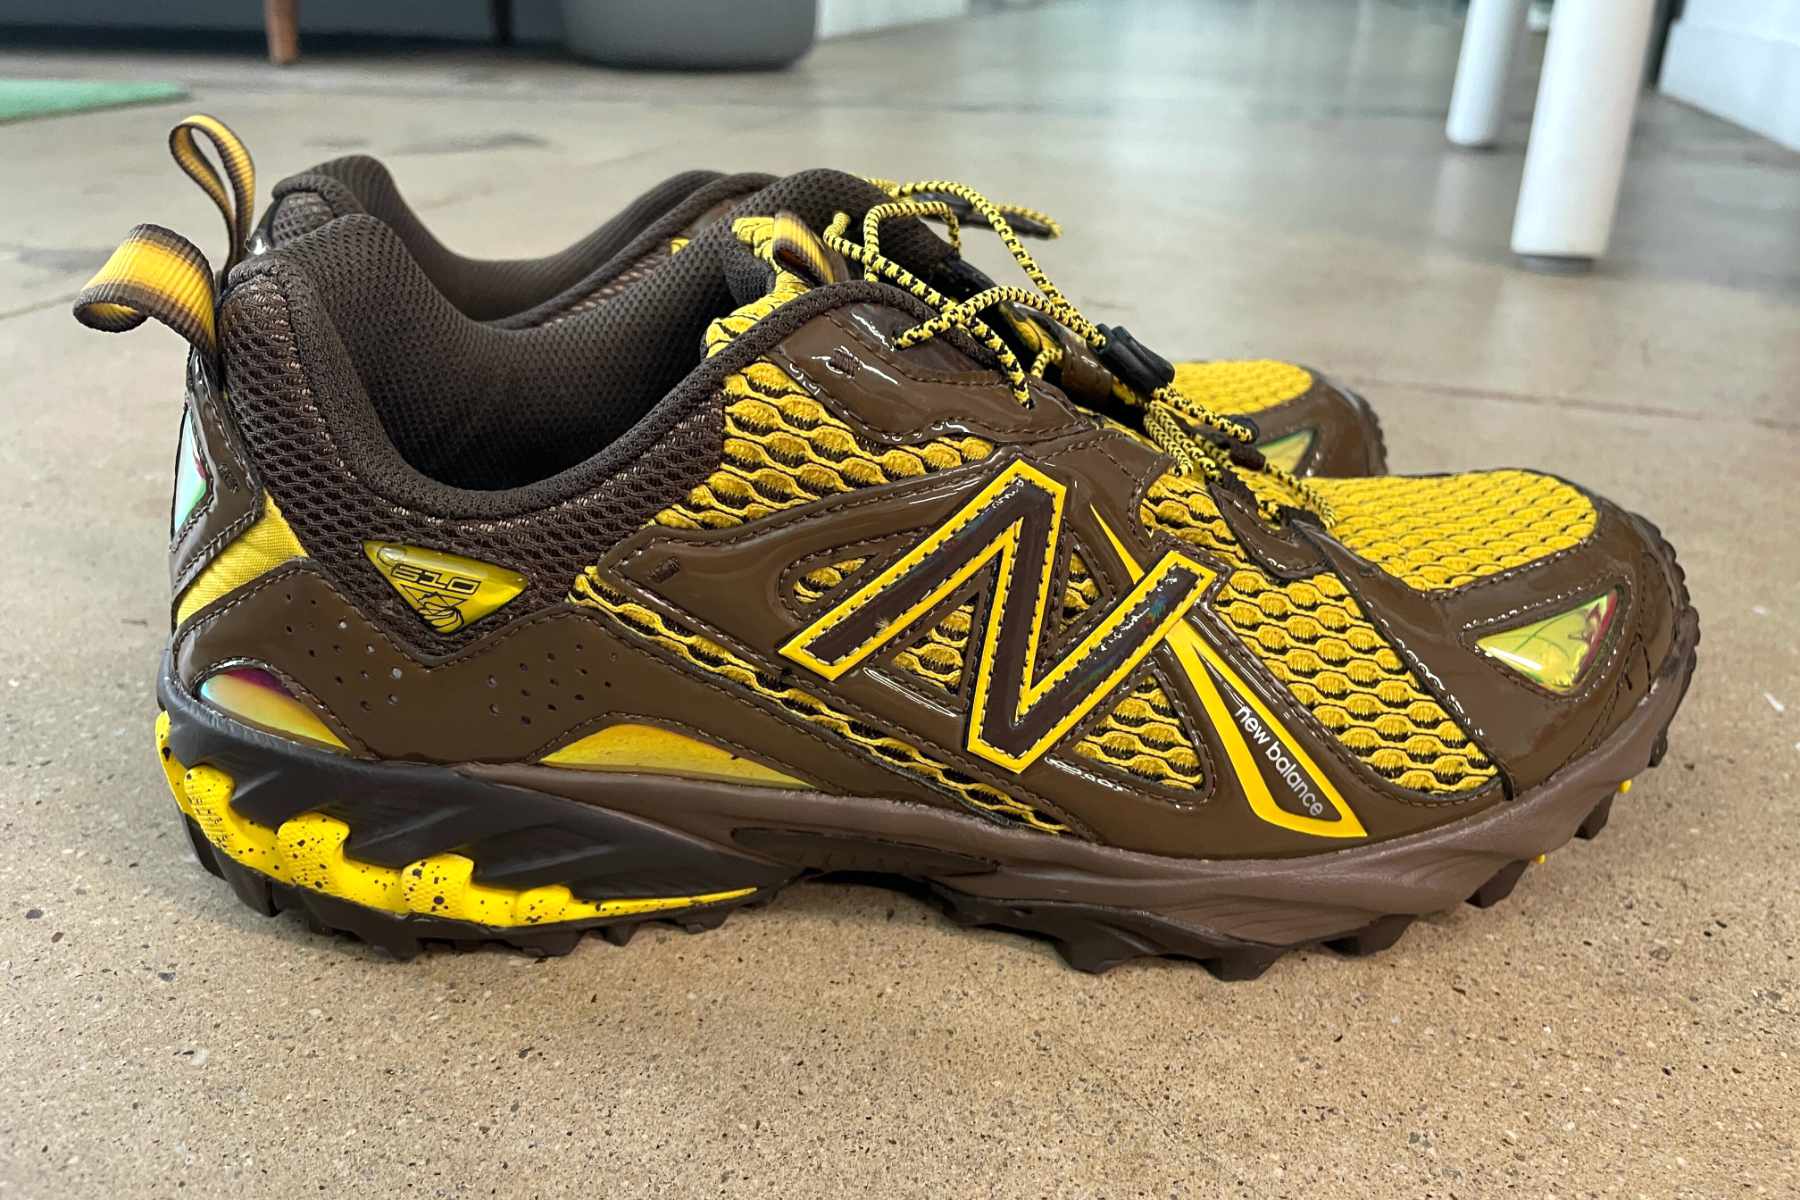 Amine's New Balance 610 shoe, "The Mooz," in brown and yellow colors photographed from the outside